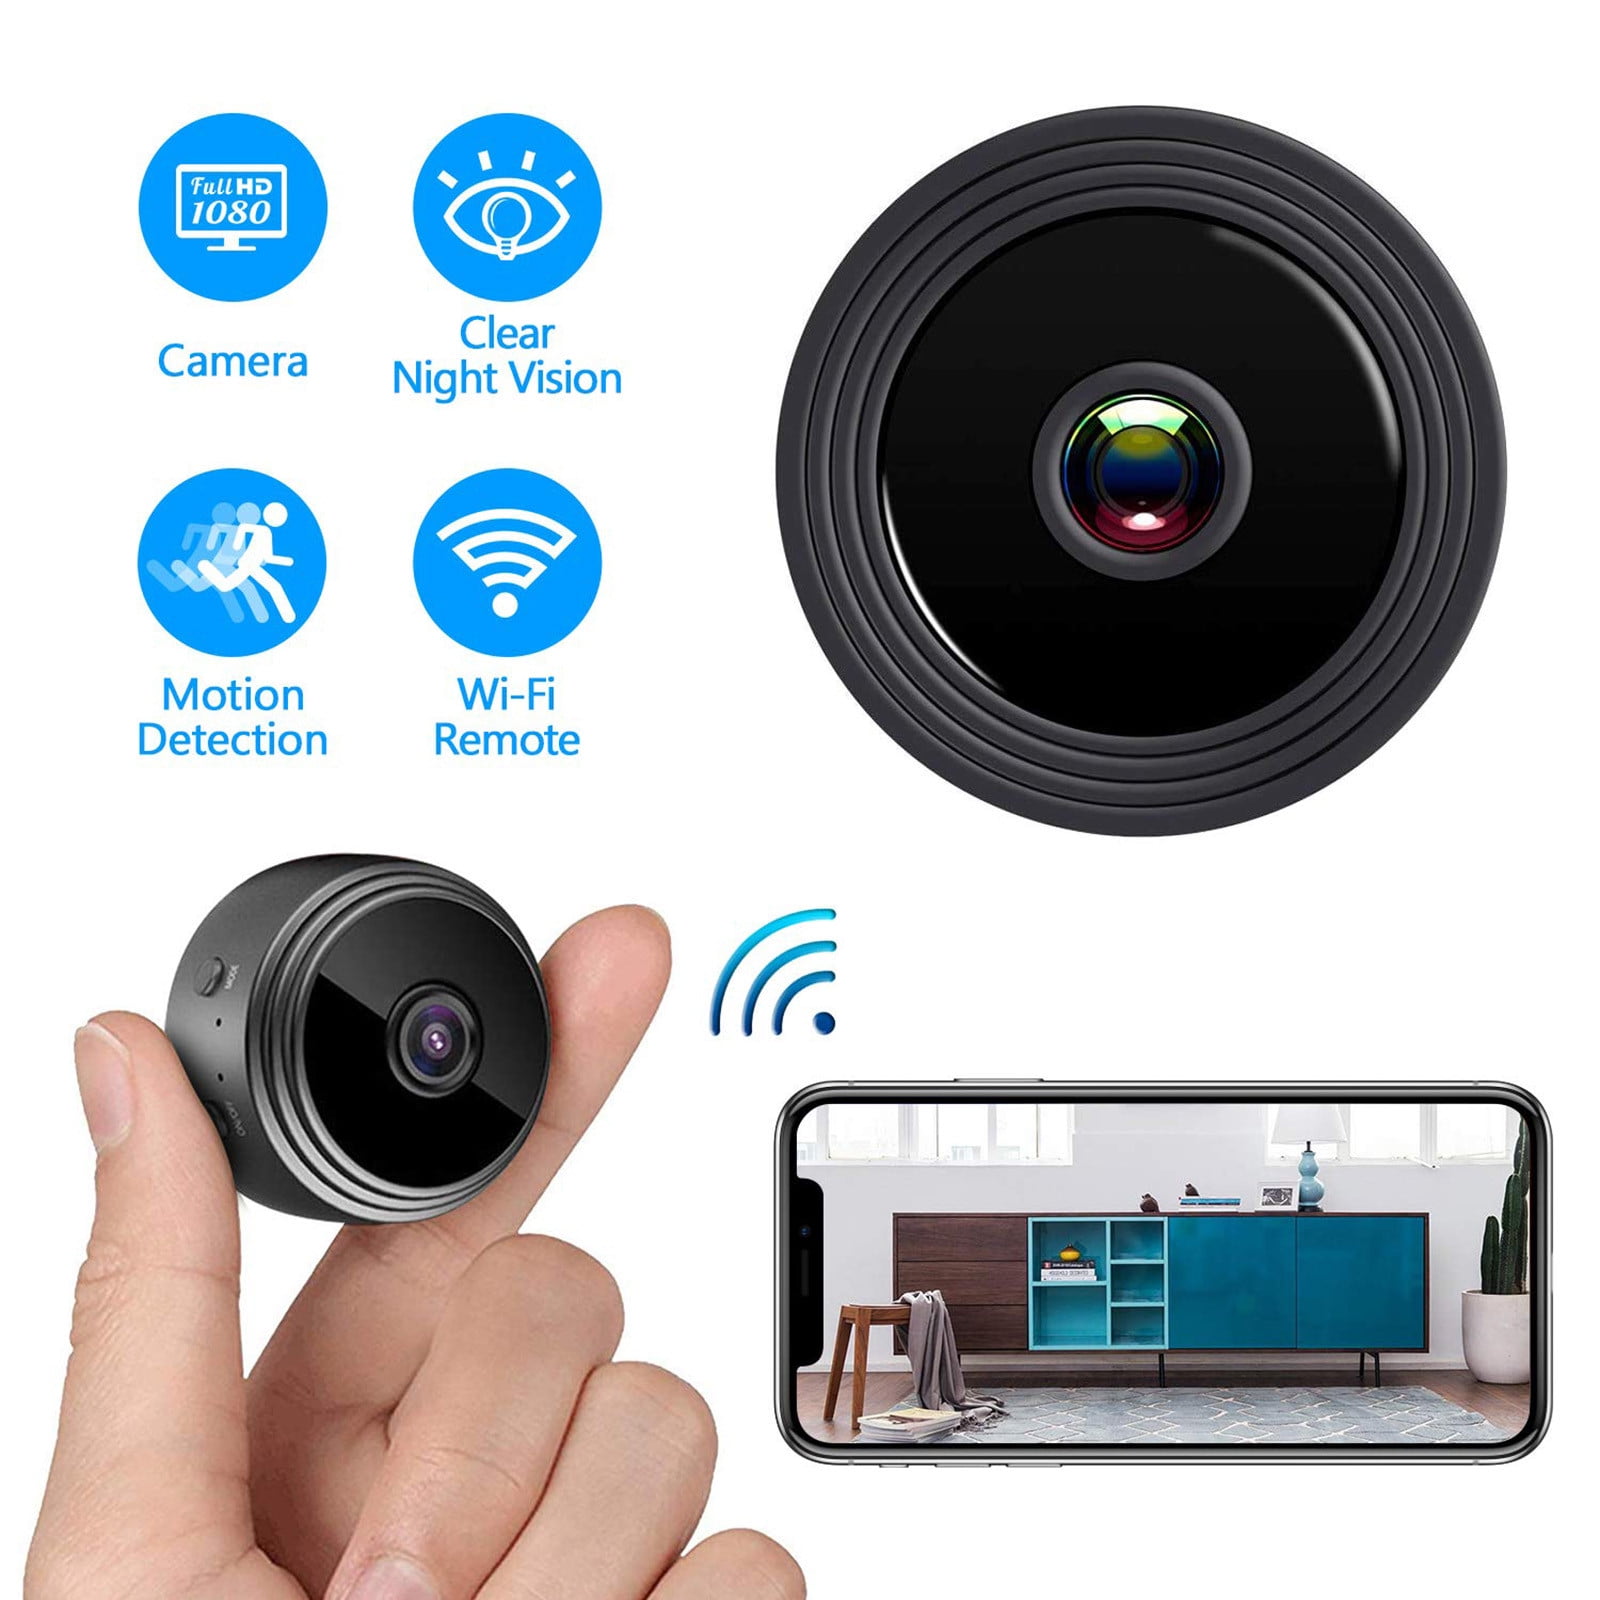 Room Office Easy Setup Security Cam for Home Mini Wireless Remote Live View with Free Phone App Full HD 1080P Spy Camera WiFi Hidden Cameras with Motion Detection Car Nanny 